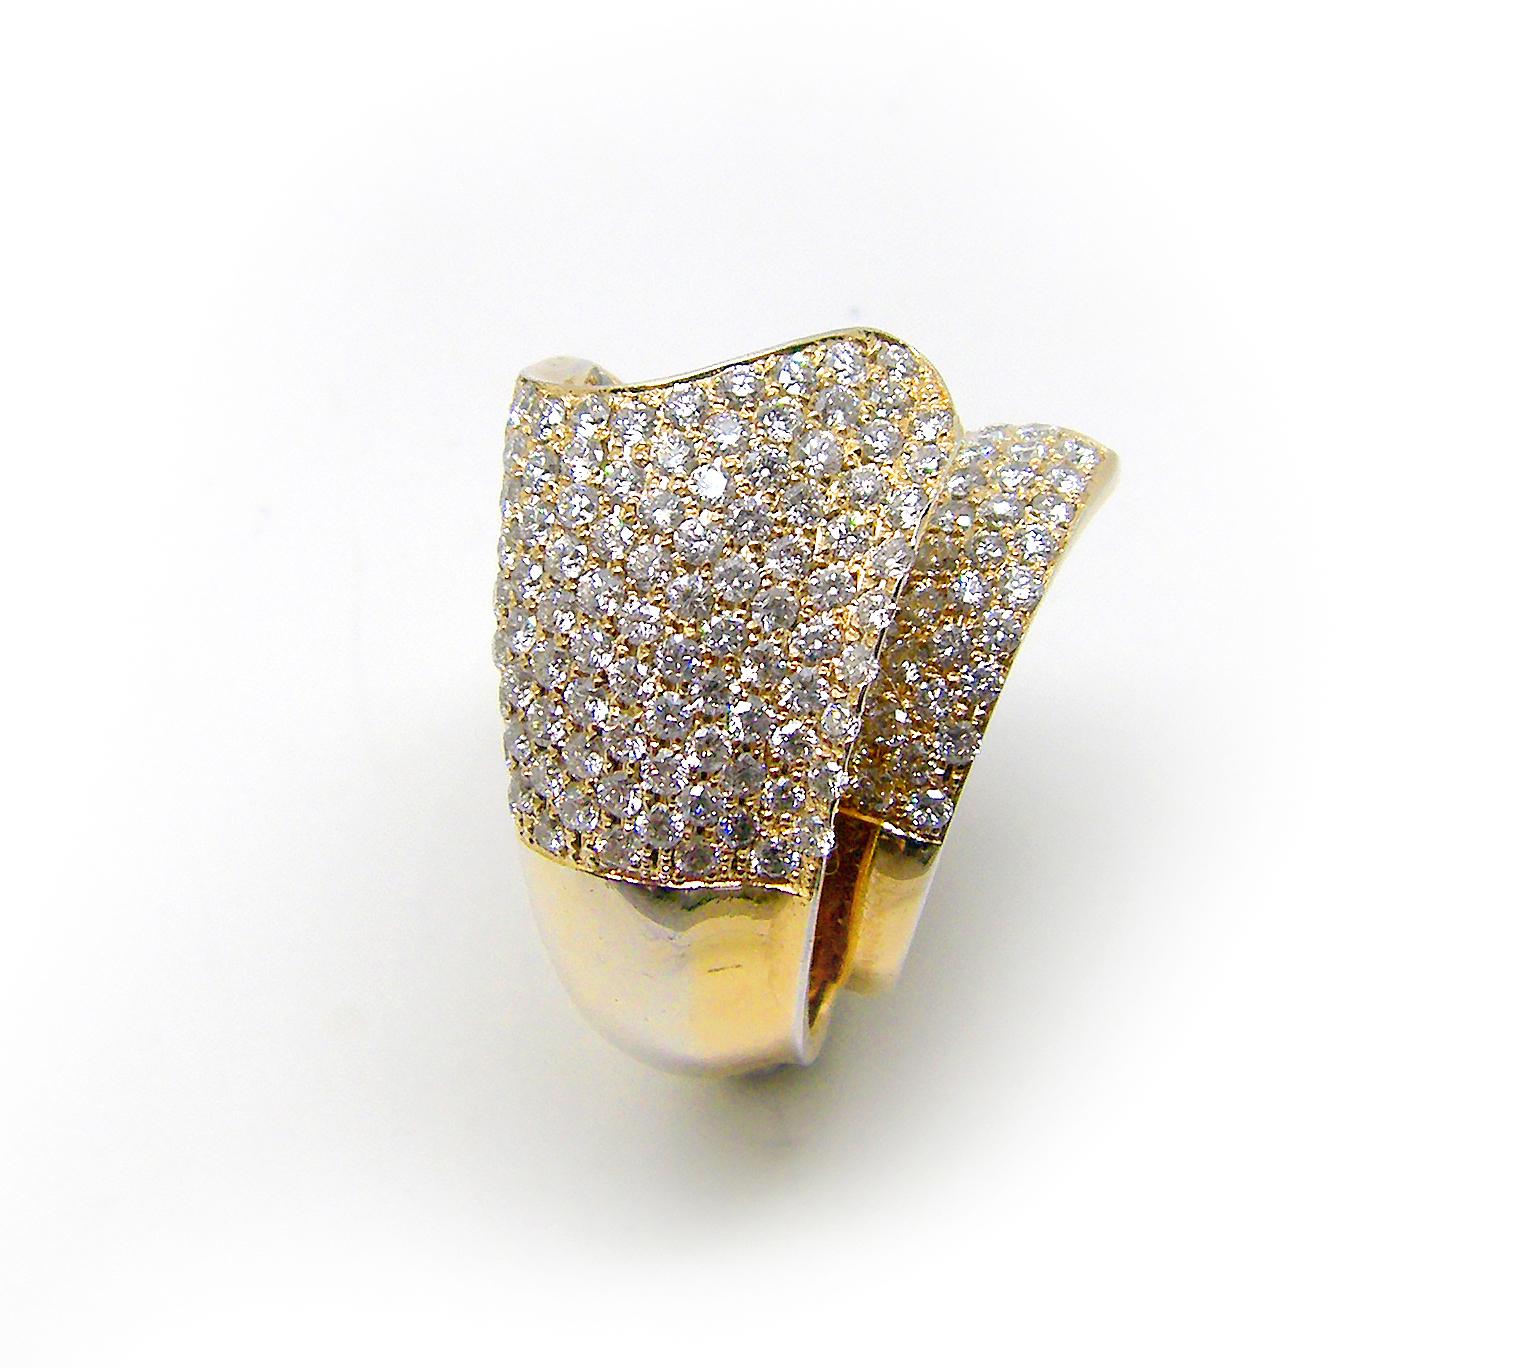 This S.Georgios designer 18 Karat Rose Gold White Brilliant Cut Diamond Wide Band Ring is all handmade in a unique design. The gorgeous wide band features brilliant-cut white diamonds total weight of 3.90 Carat which is set in an overlapping design